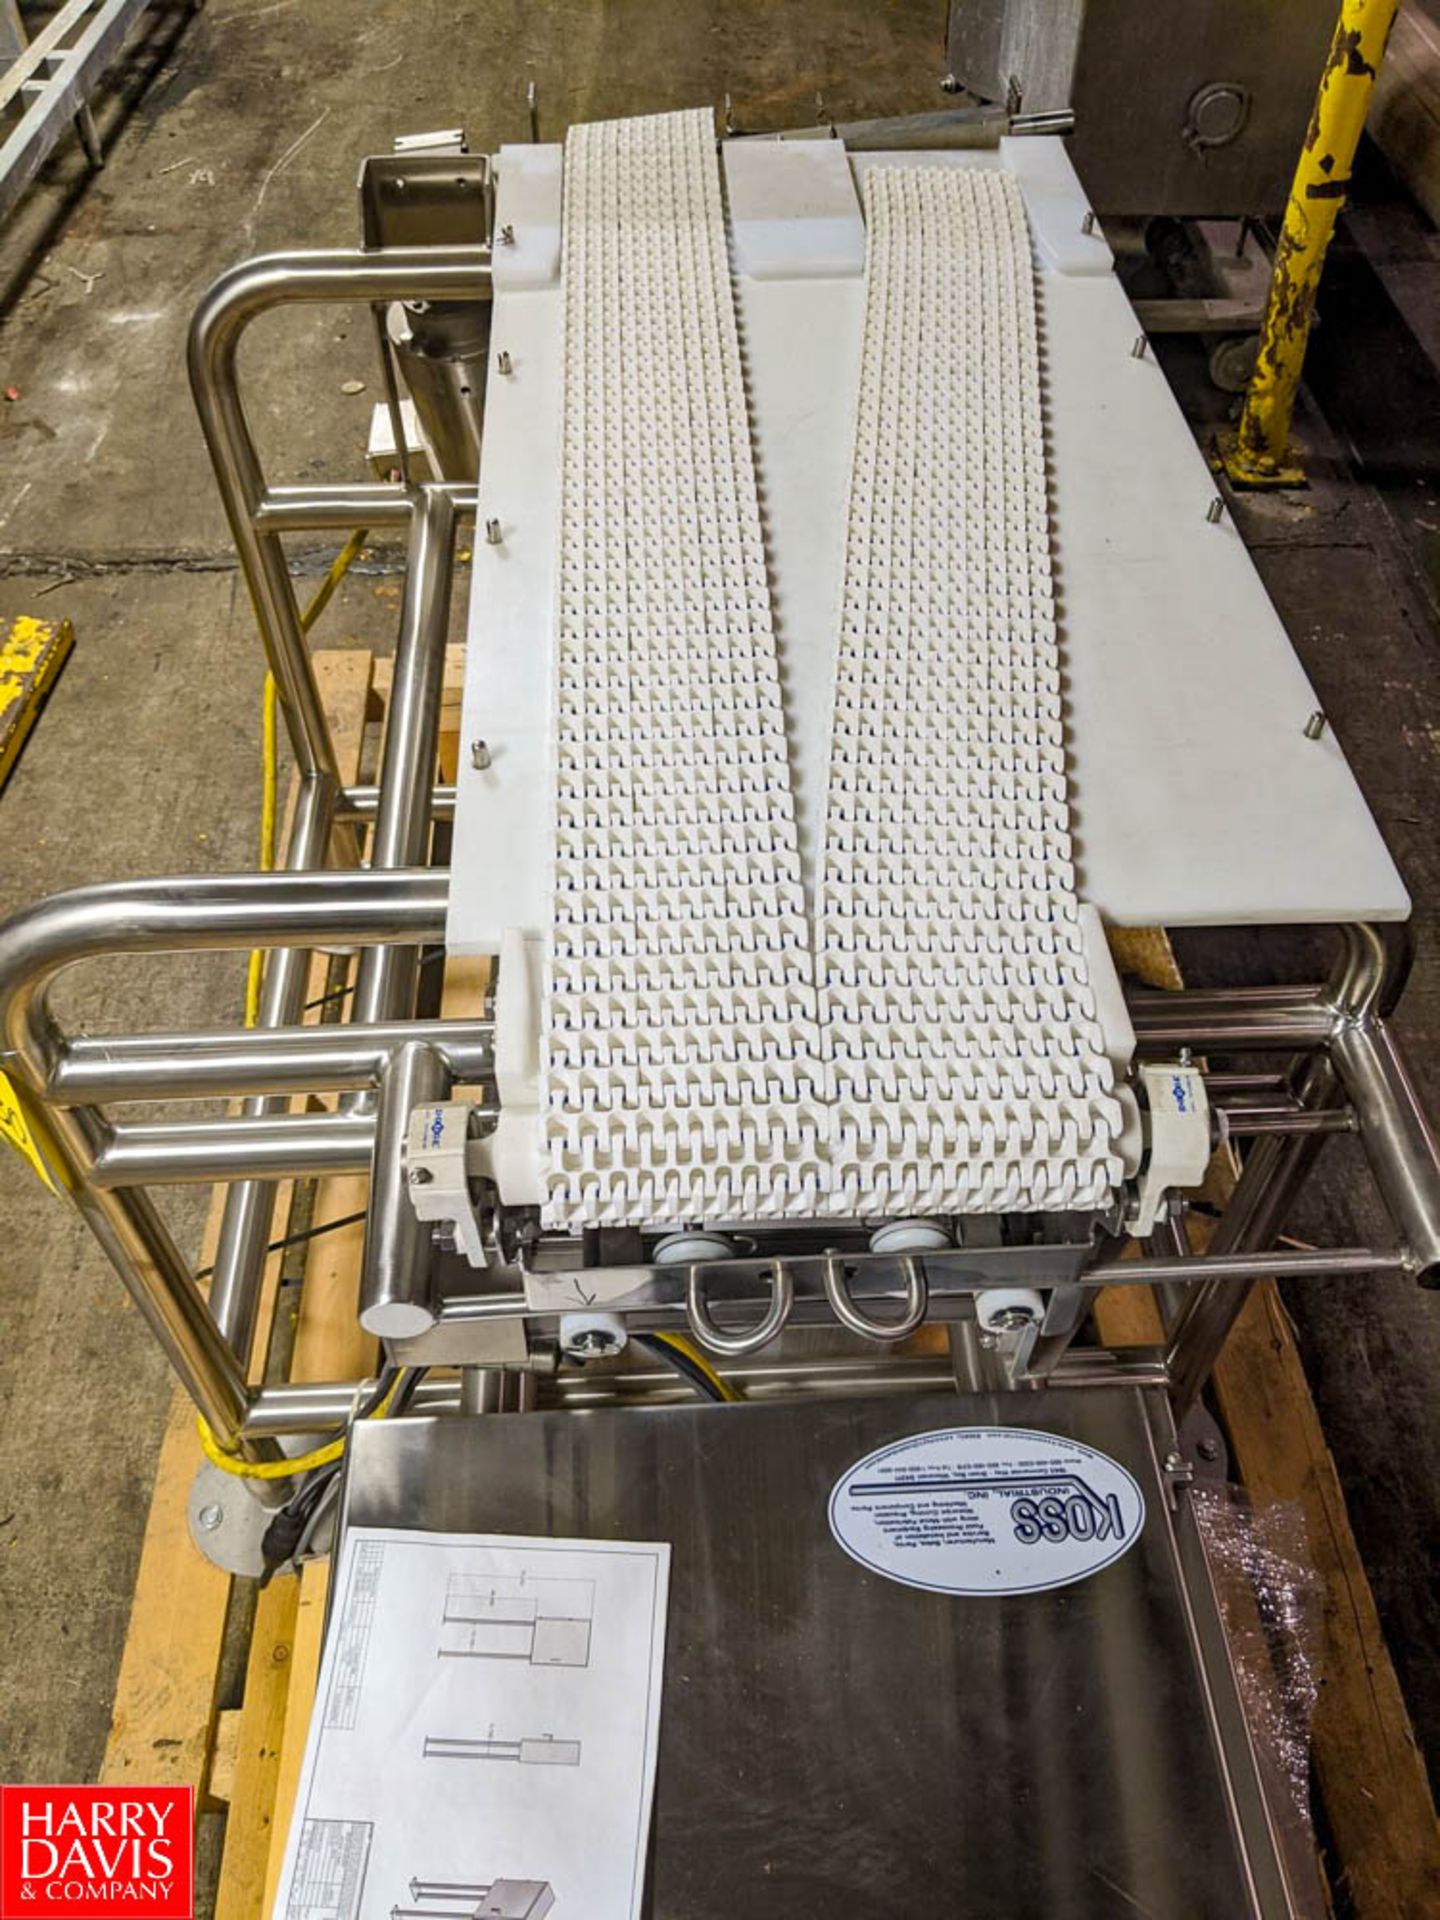 Koss Industrial 4' Sanitary Diverting Conveyor with 6" Interlox Belting & S/S Control Panel (Loc. - Image 2 of 3